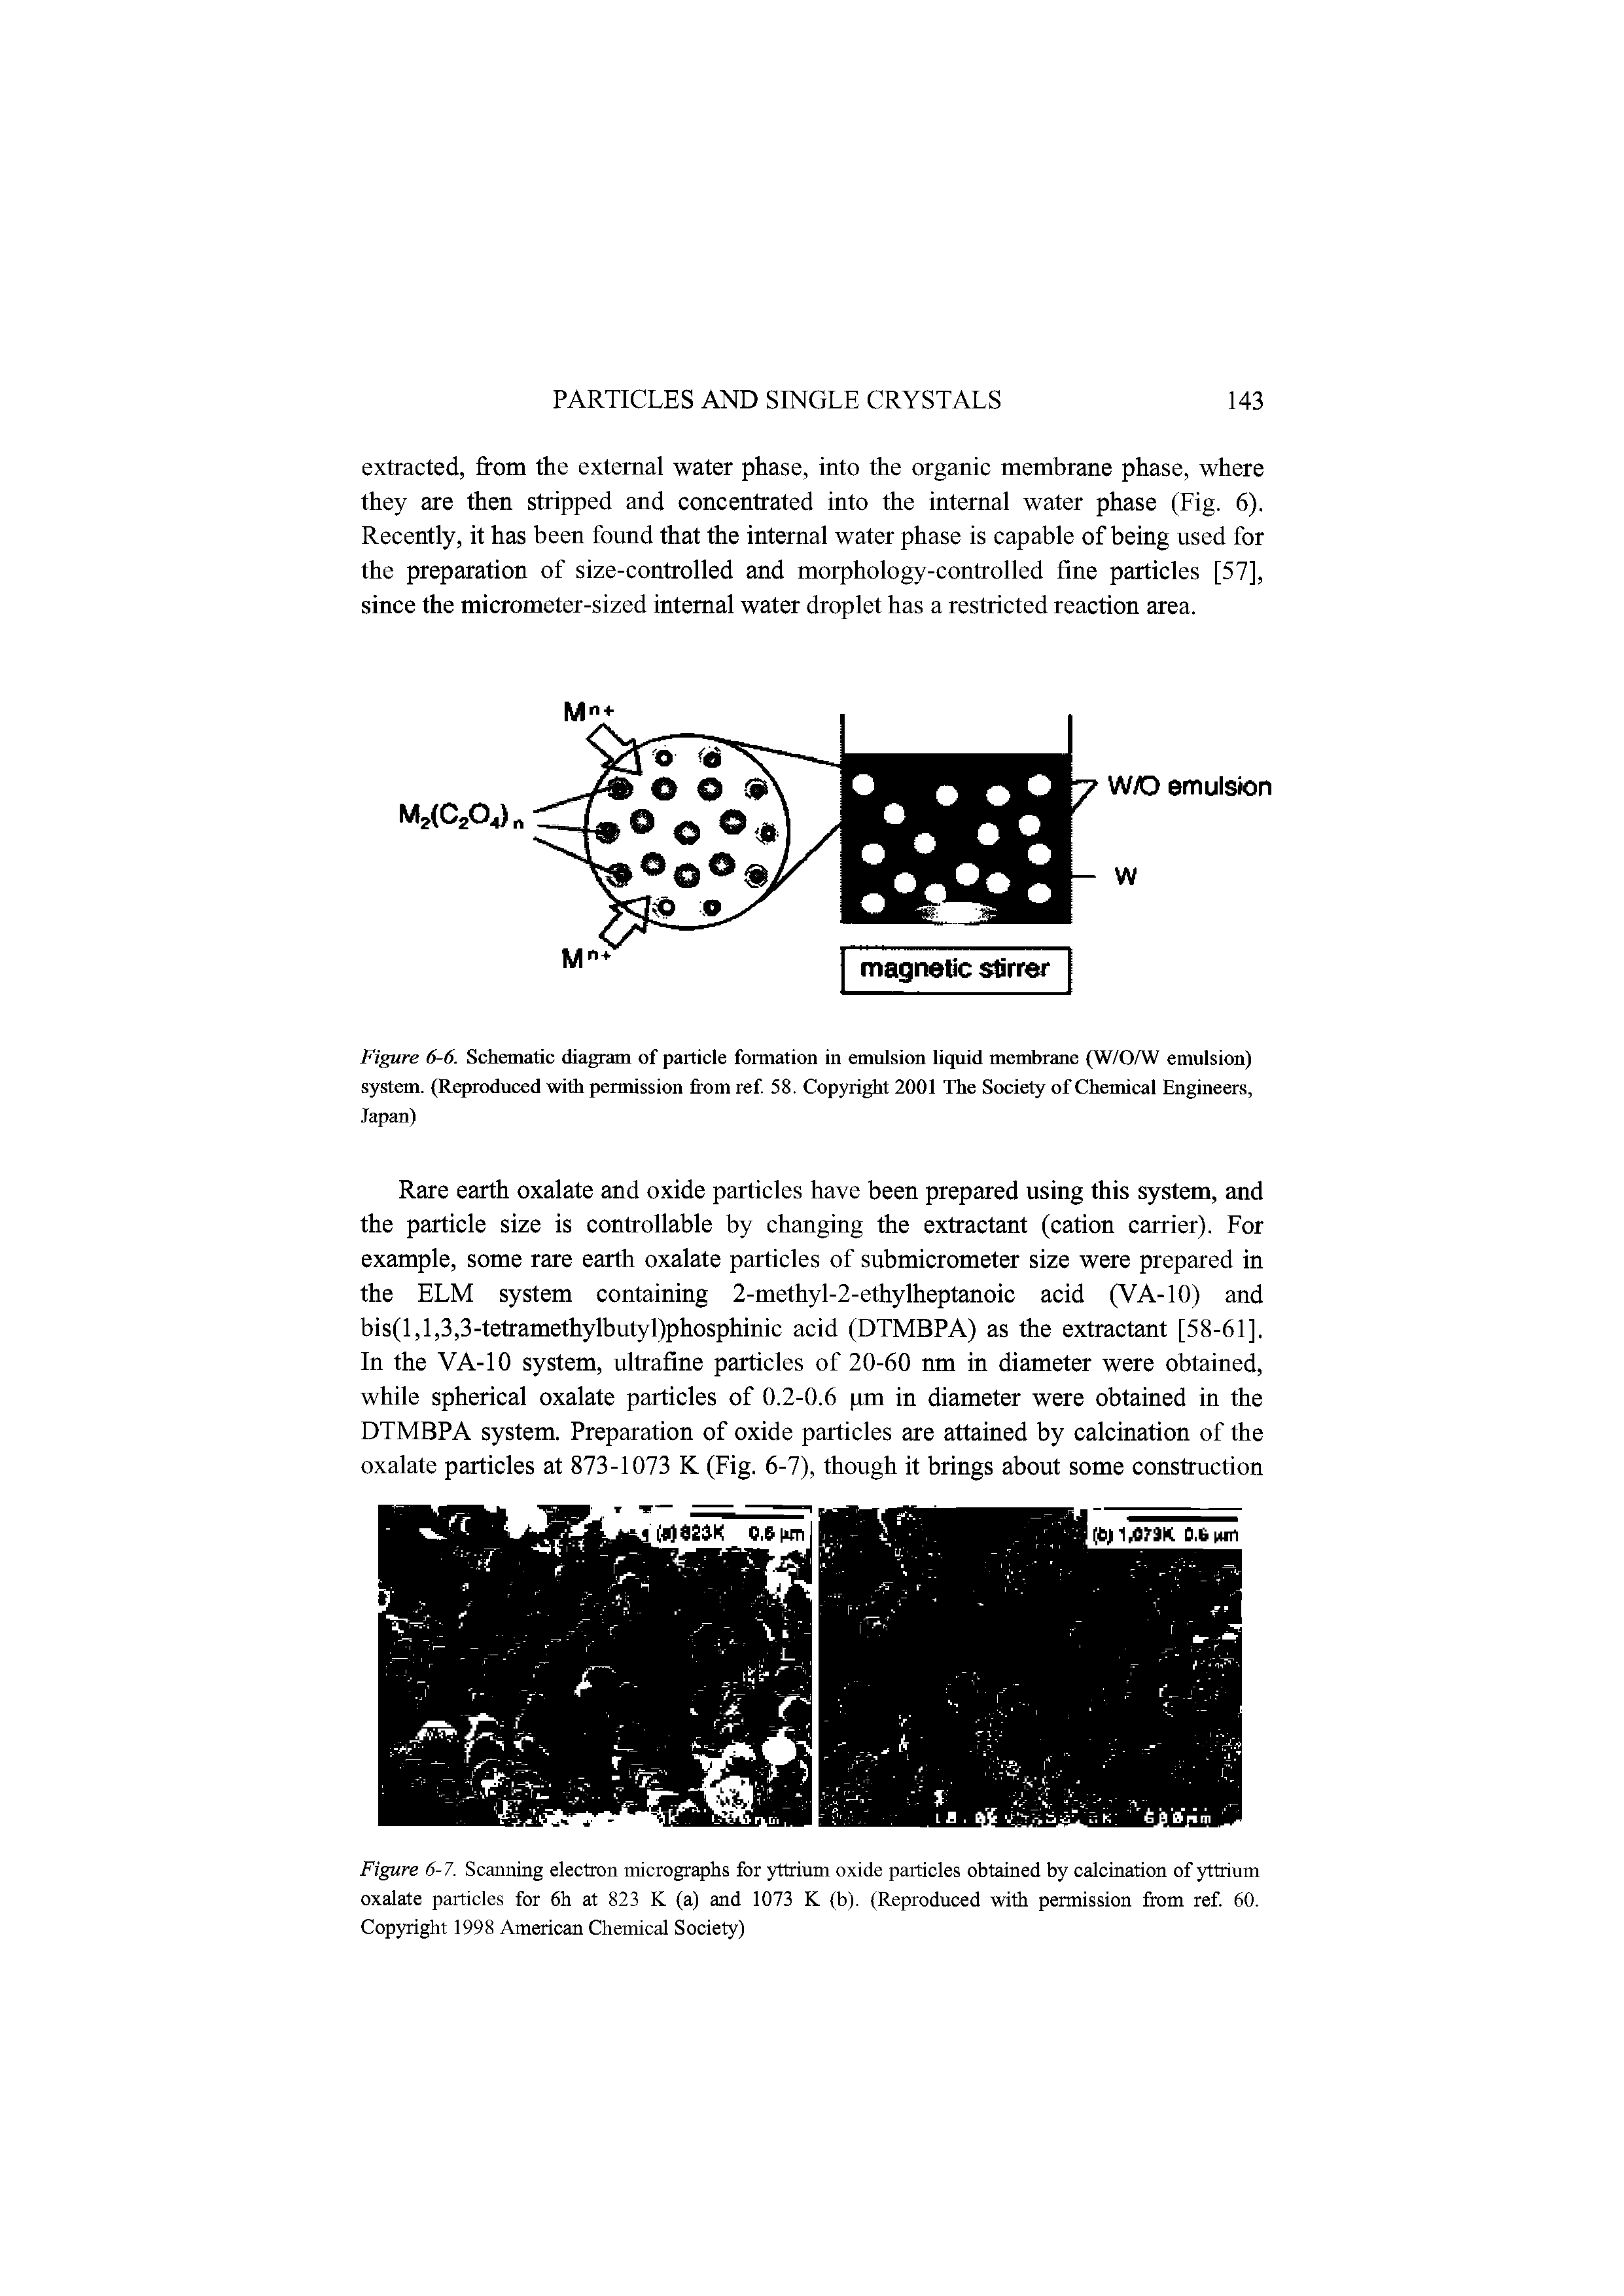 Figure 6-7. Scanning electron micrographs for yttrium oxide particles obtained by calcination of yttrium oxalate particles for 6h at 823 K. (a) and 1073 K (b). (Reprodueed with permission from ref. 60. Copyright 1998 American Chemical Society)...